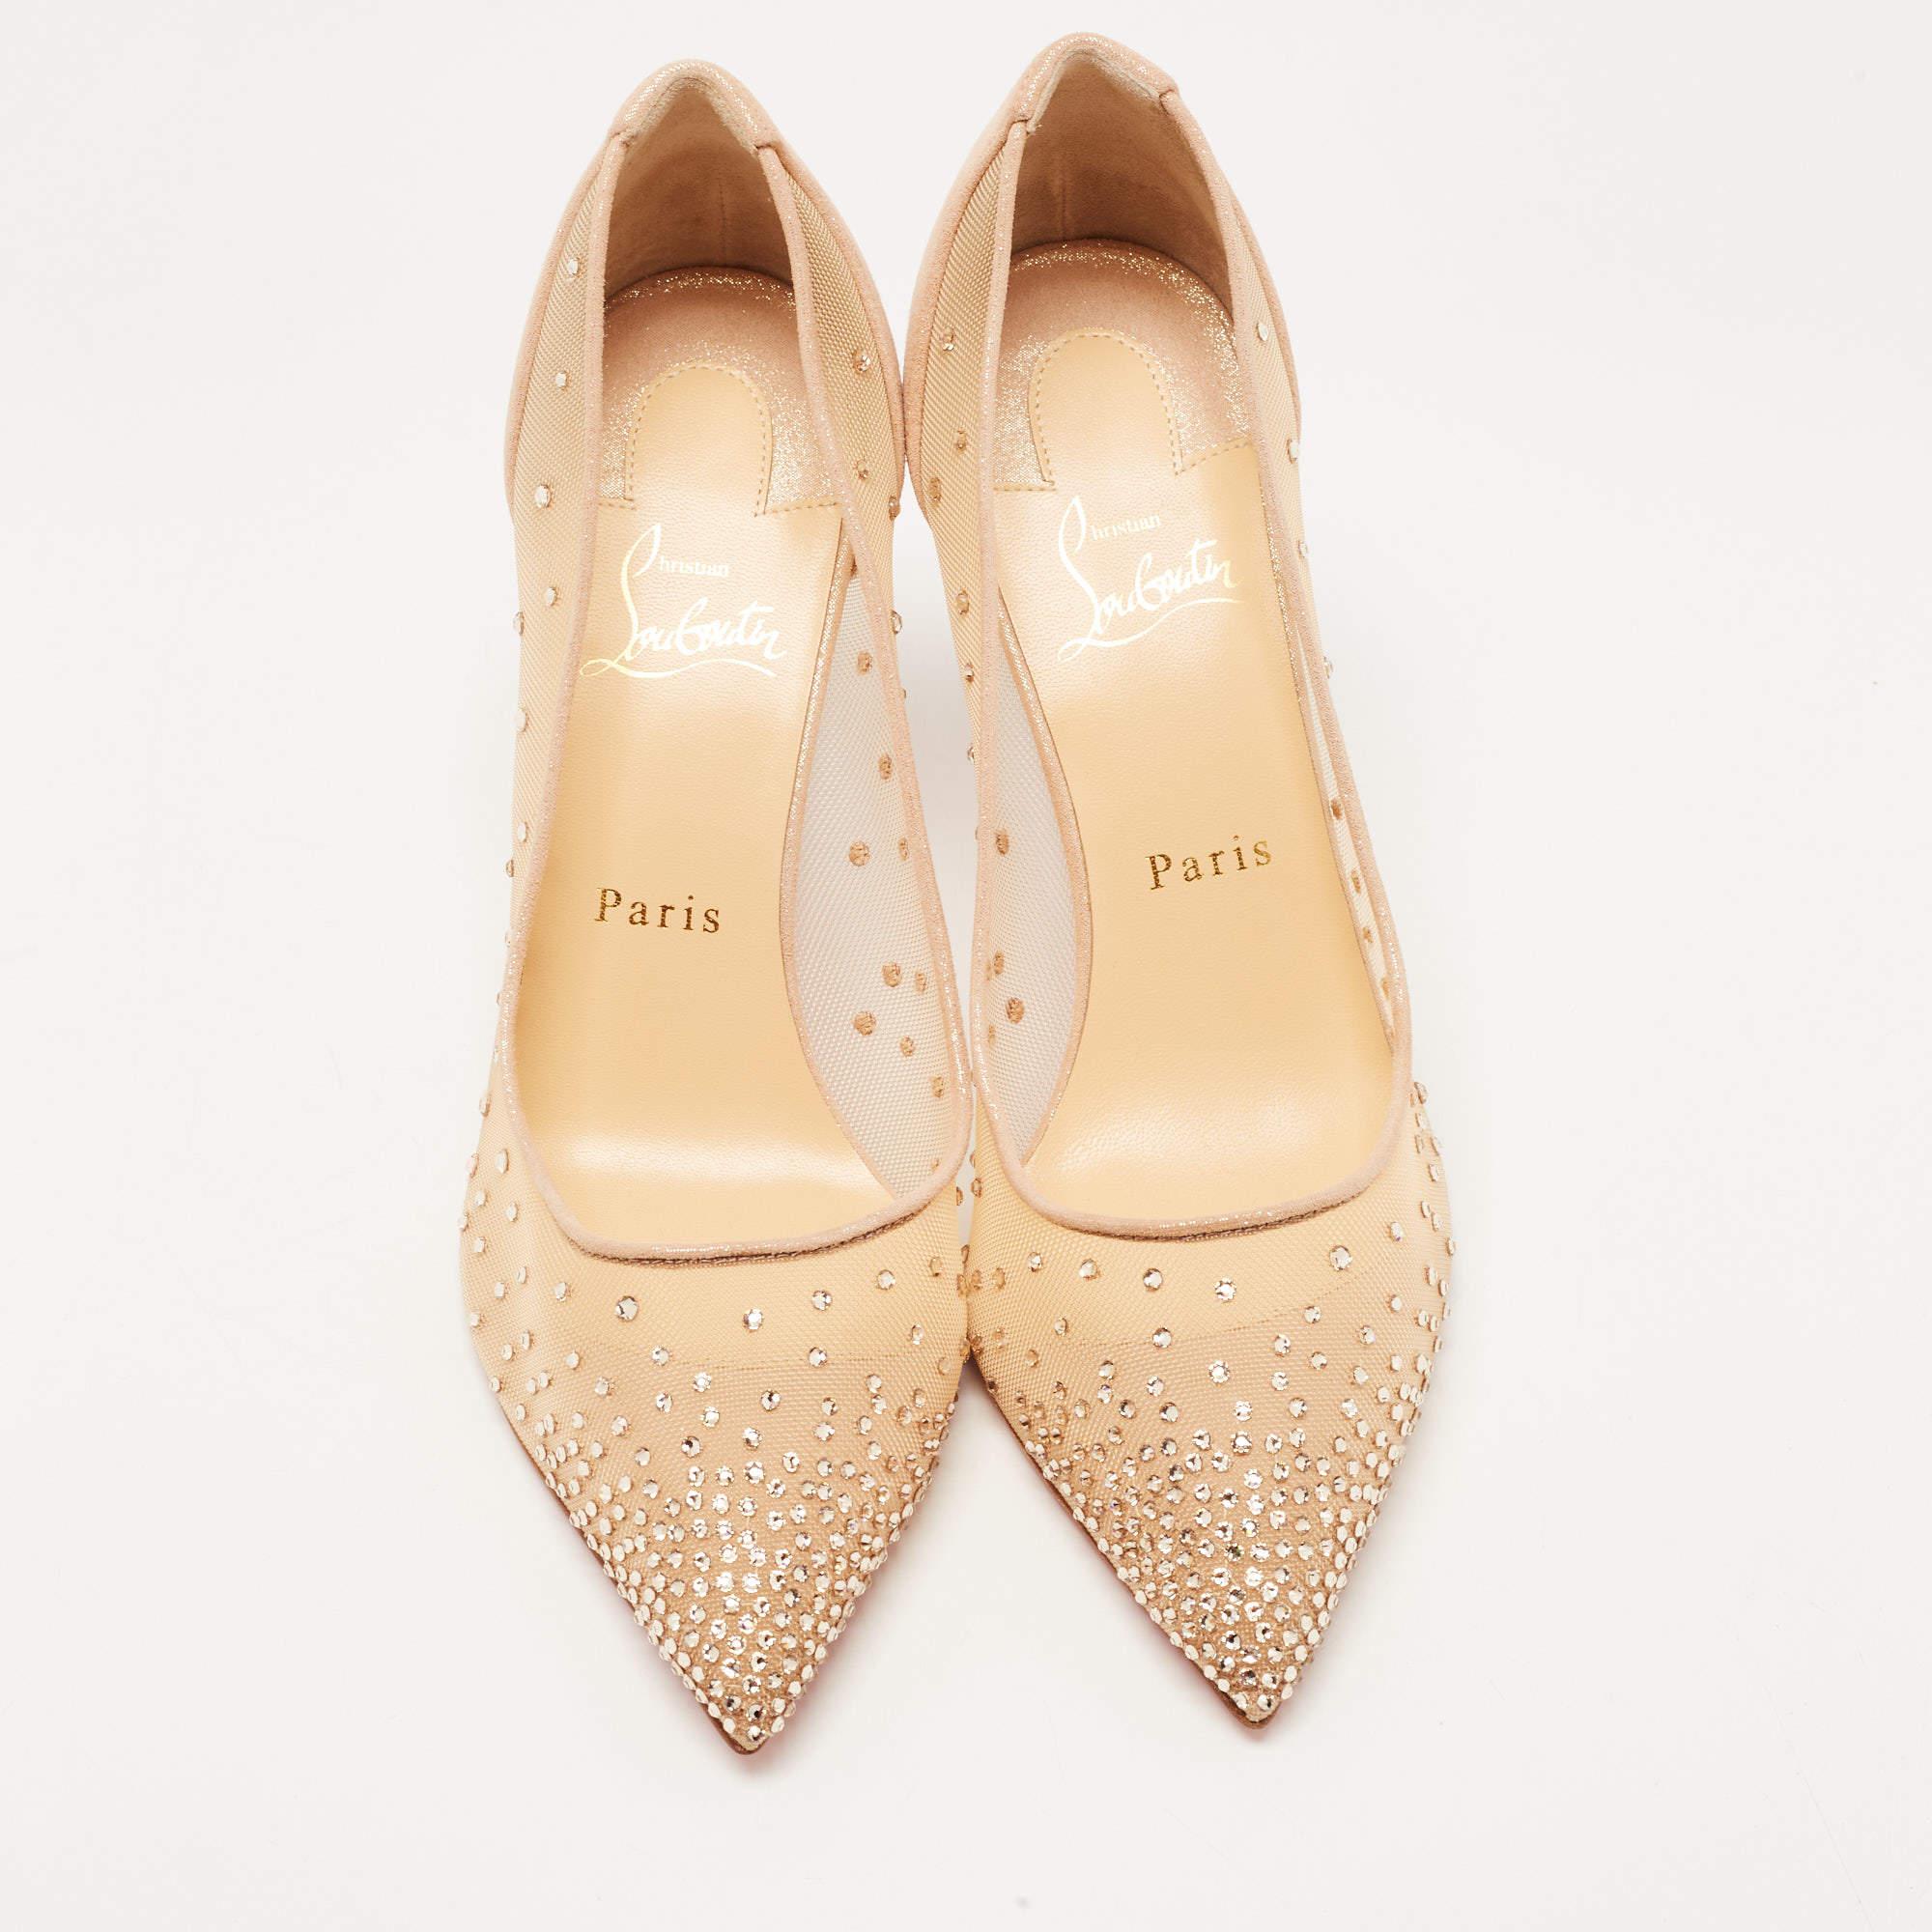 The Christian Louboutin pumps are exquisite designer shoes. Made from luxurious beige suede and mesh, these pumps feature a pointed-toe design that exudes elegance and sophistication. Adorned with dazzling strass crystals, they add a touch of